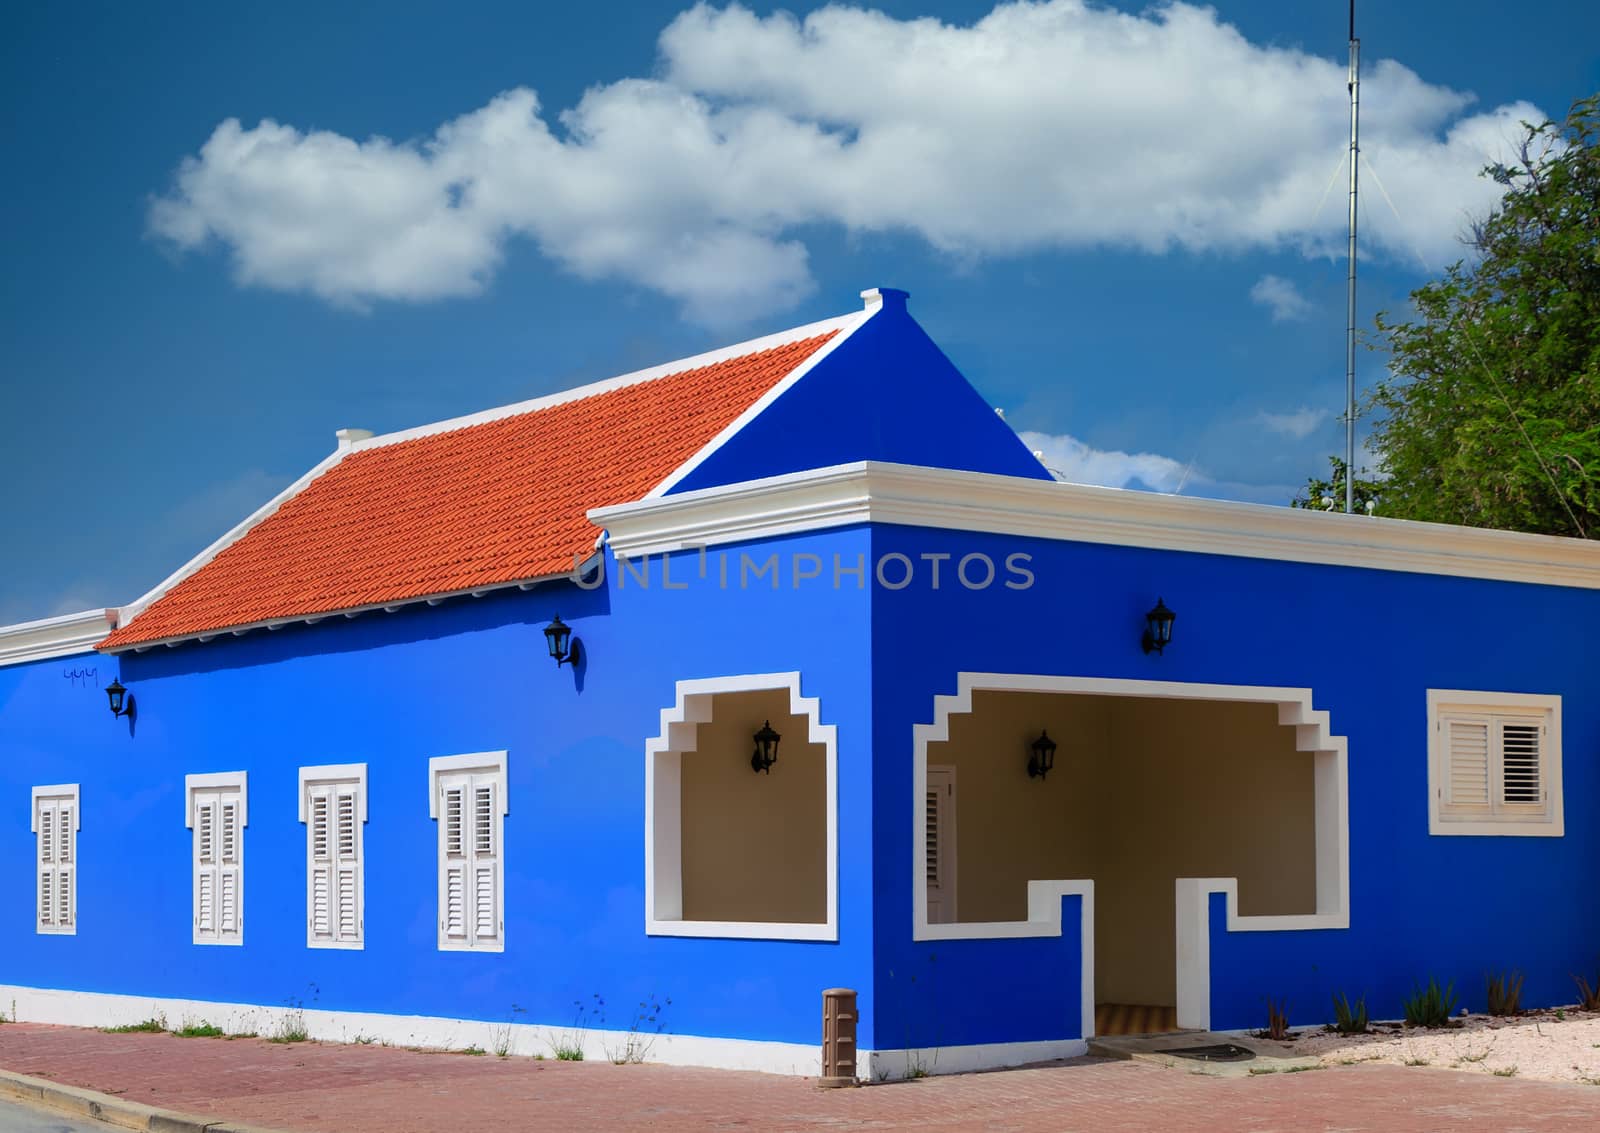 Blue Plaster Building with Orange Roof by dbvirago